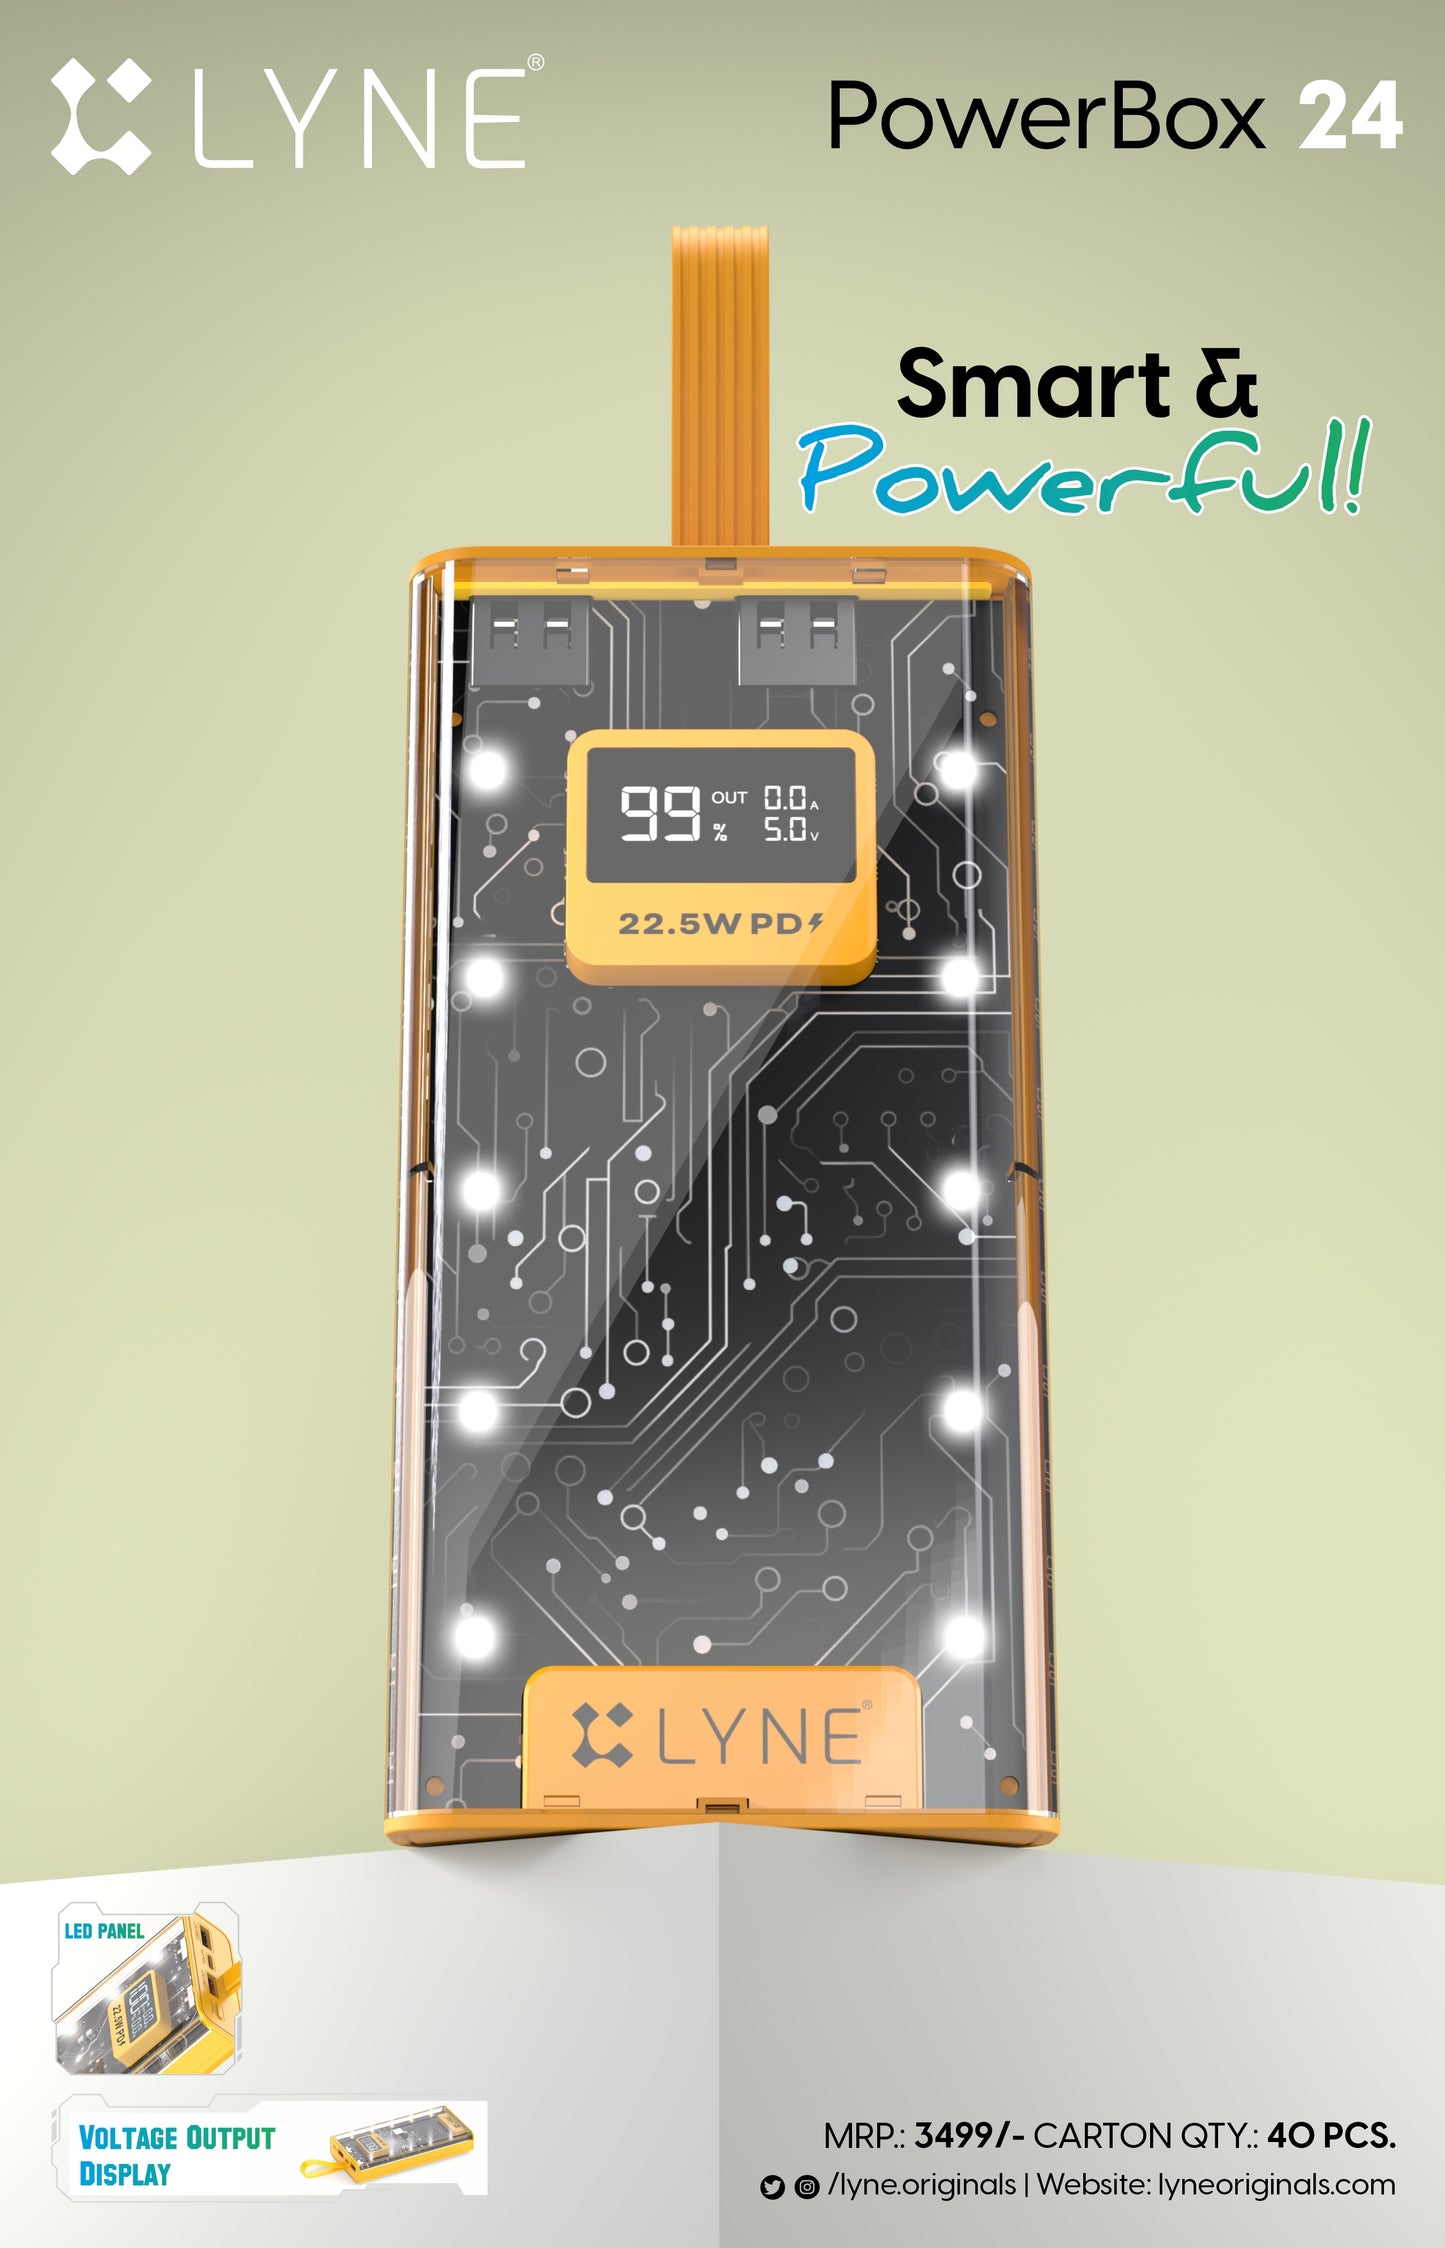 LYNE Powerbox 24 10000 mAh Battery Capacity, 22.5W PD Output with LED Panel